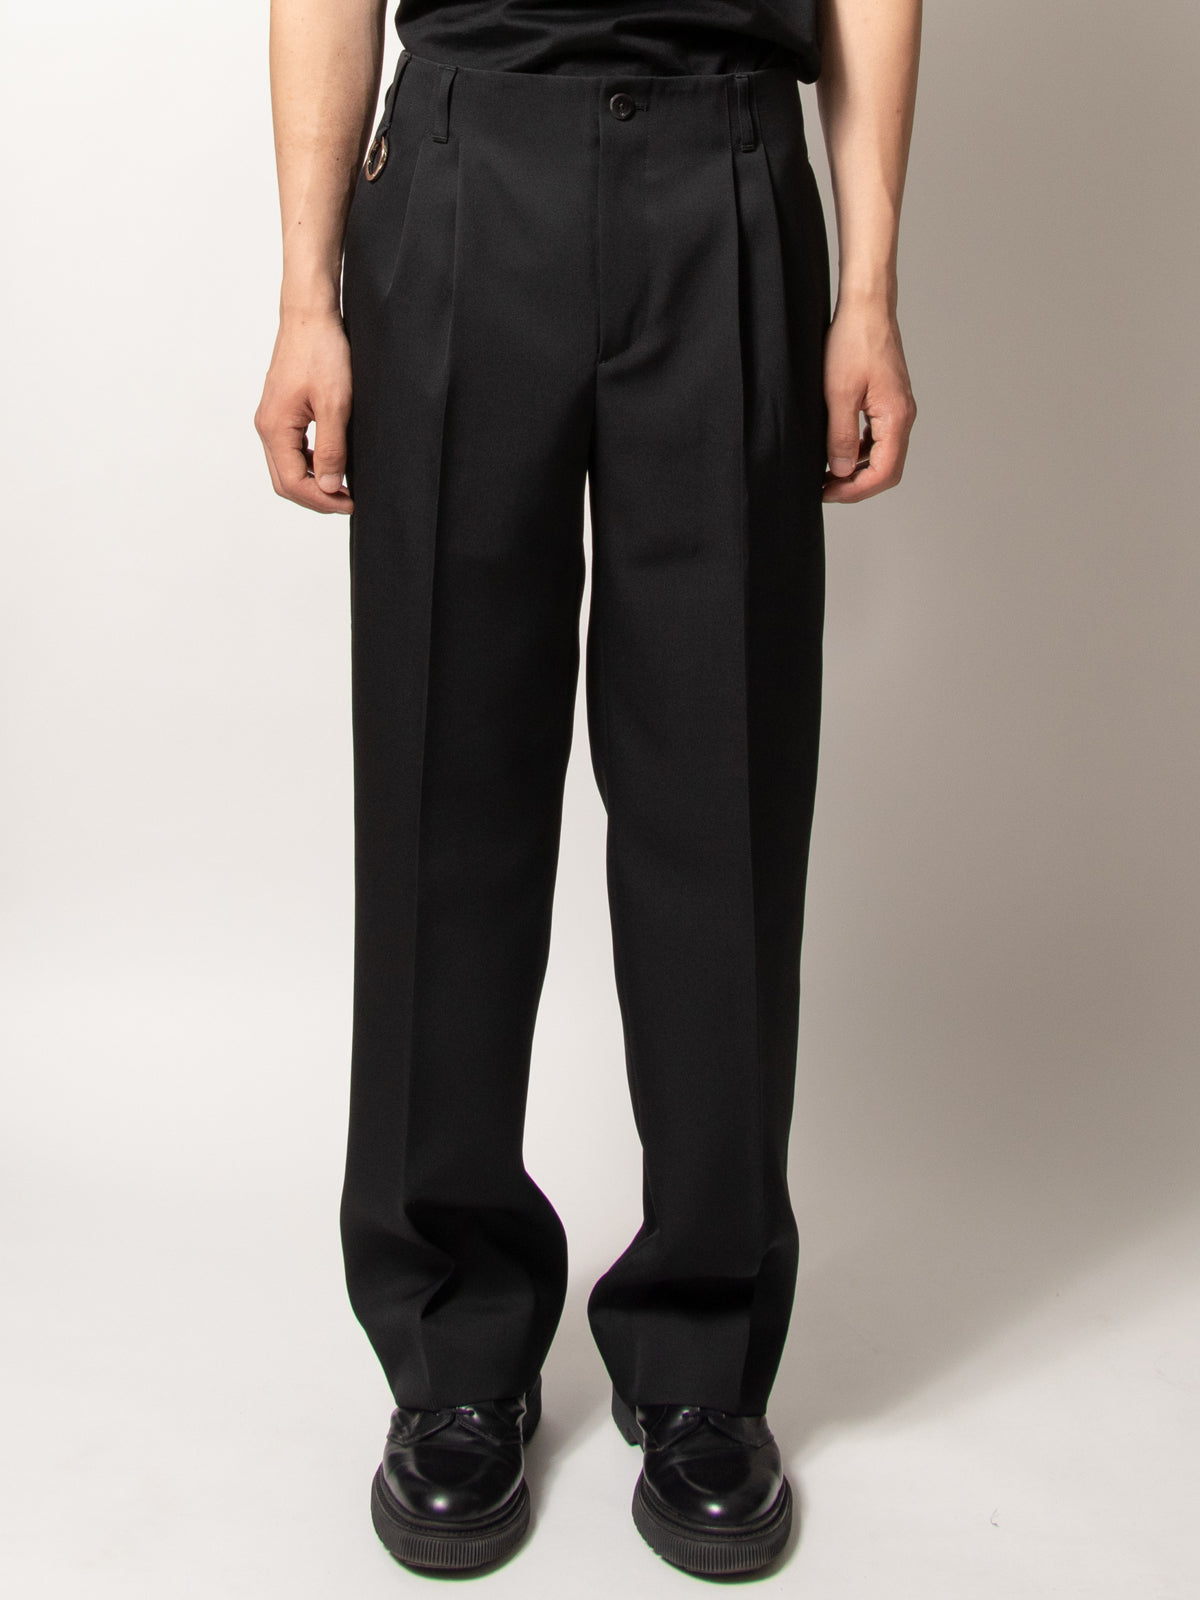 QUINN / Wide Tailored Pants (BLK) - Baby's all right